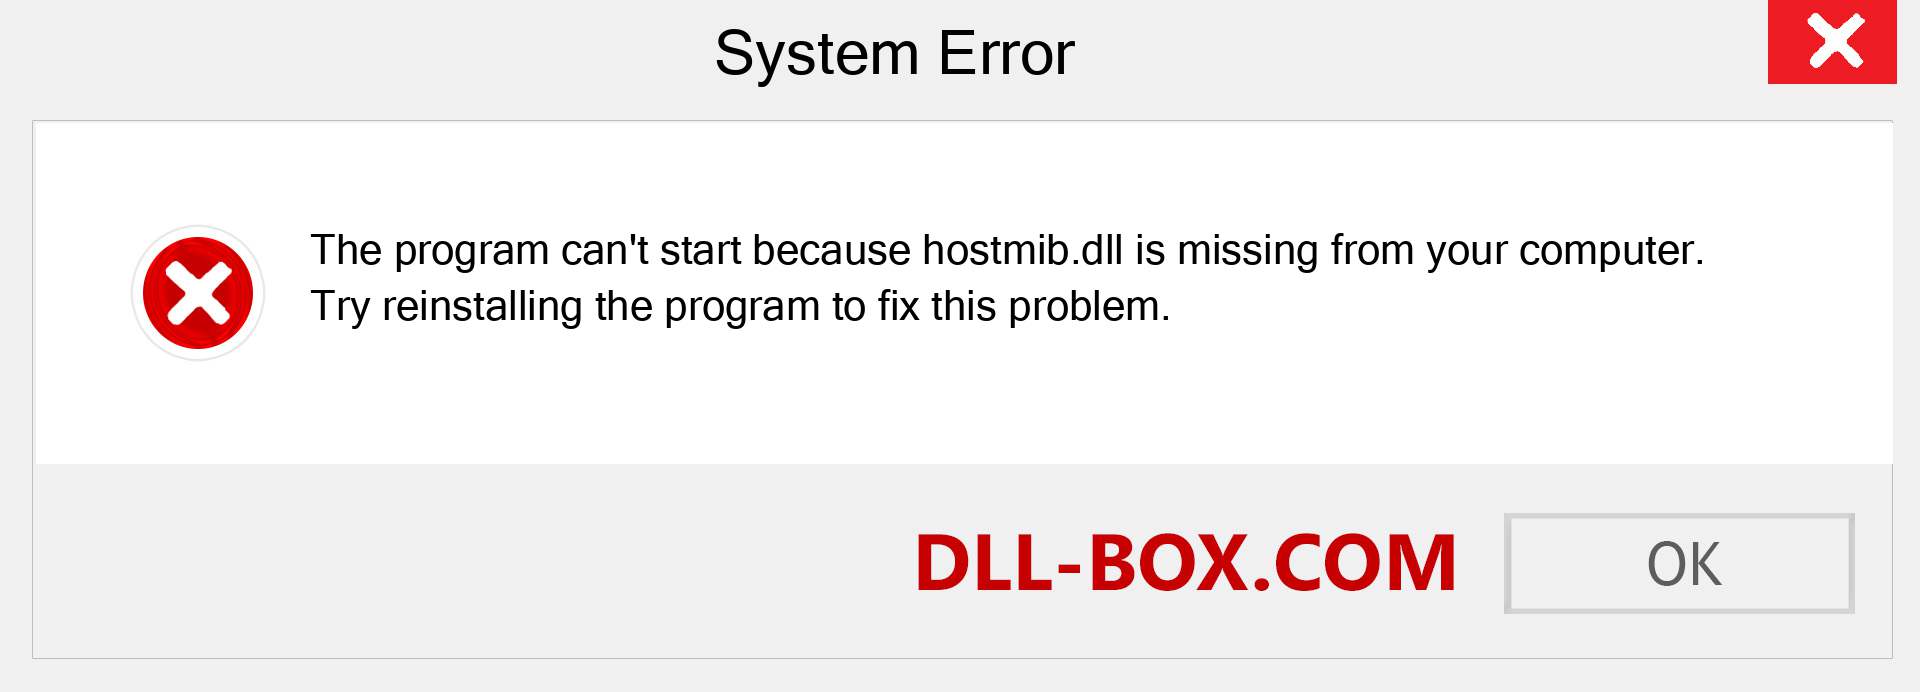  hostmib.dll file is missing?. Download for Windows 7, 8, 10 - Fix  hostmib dll Missing Error on Windows, photos, images